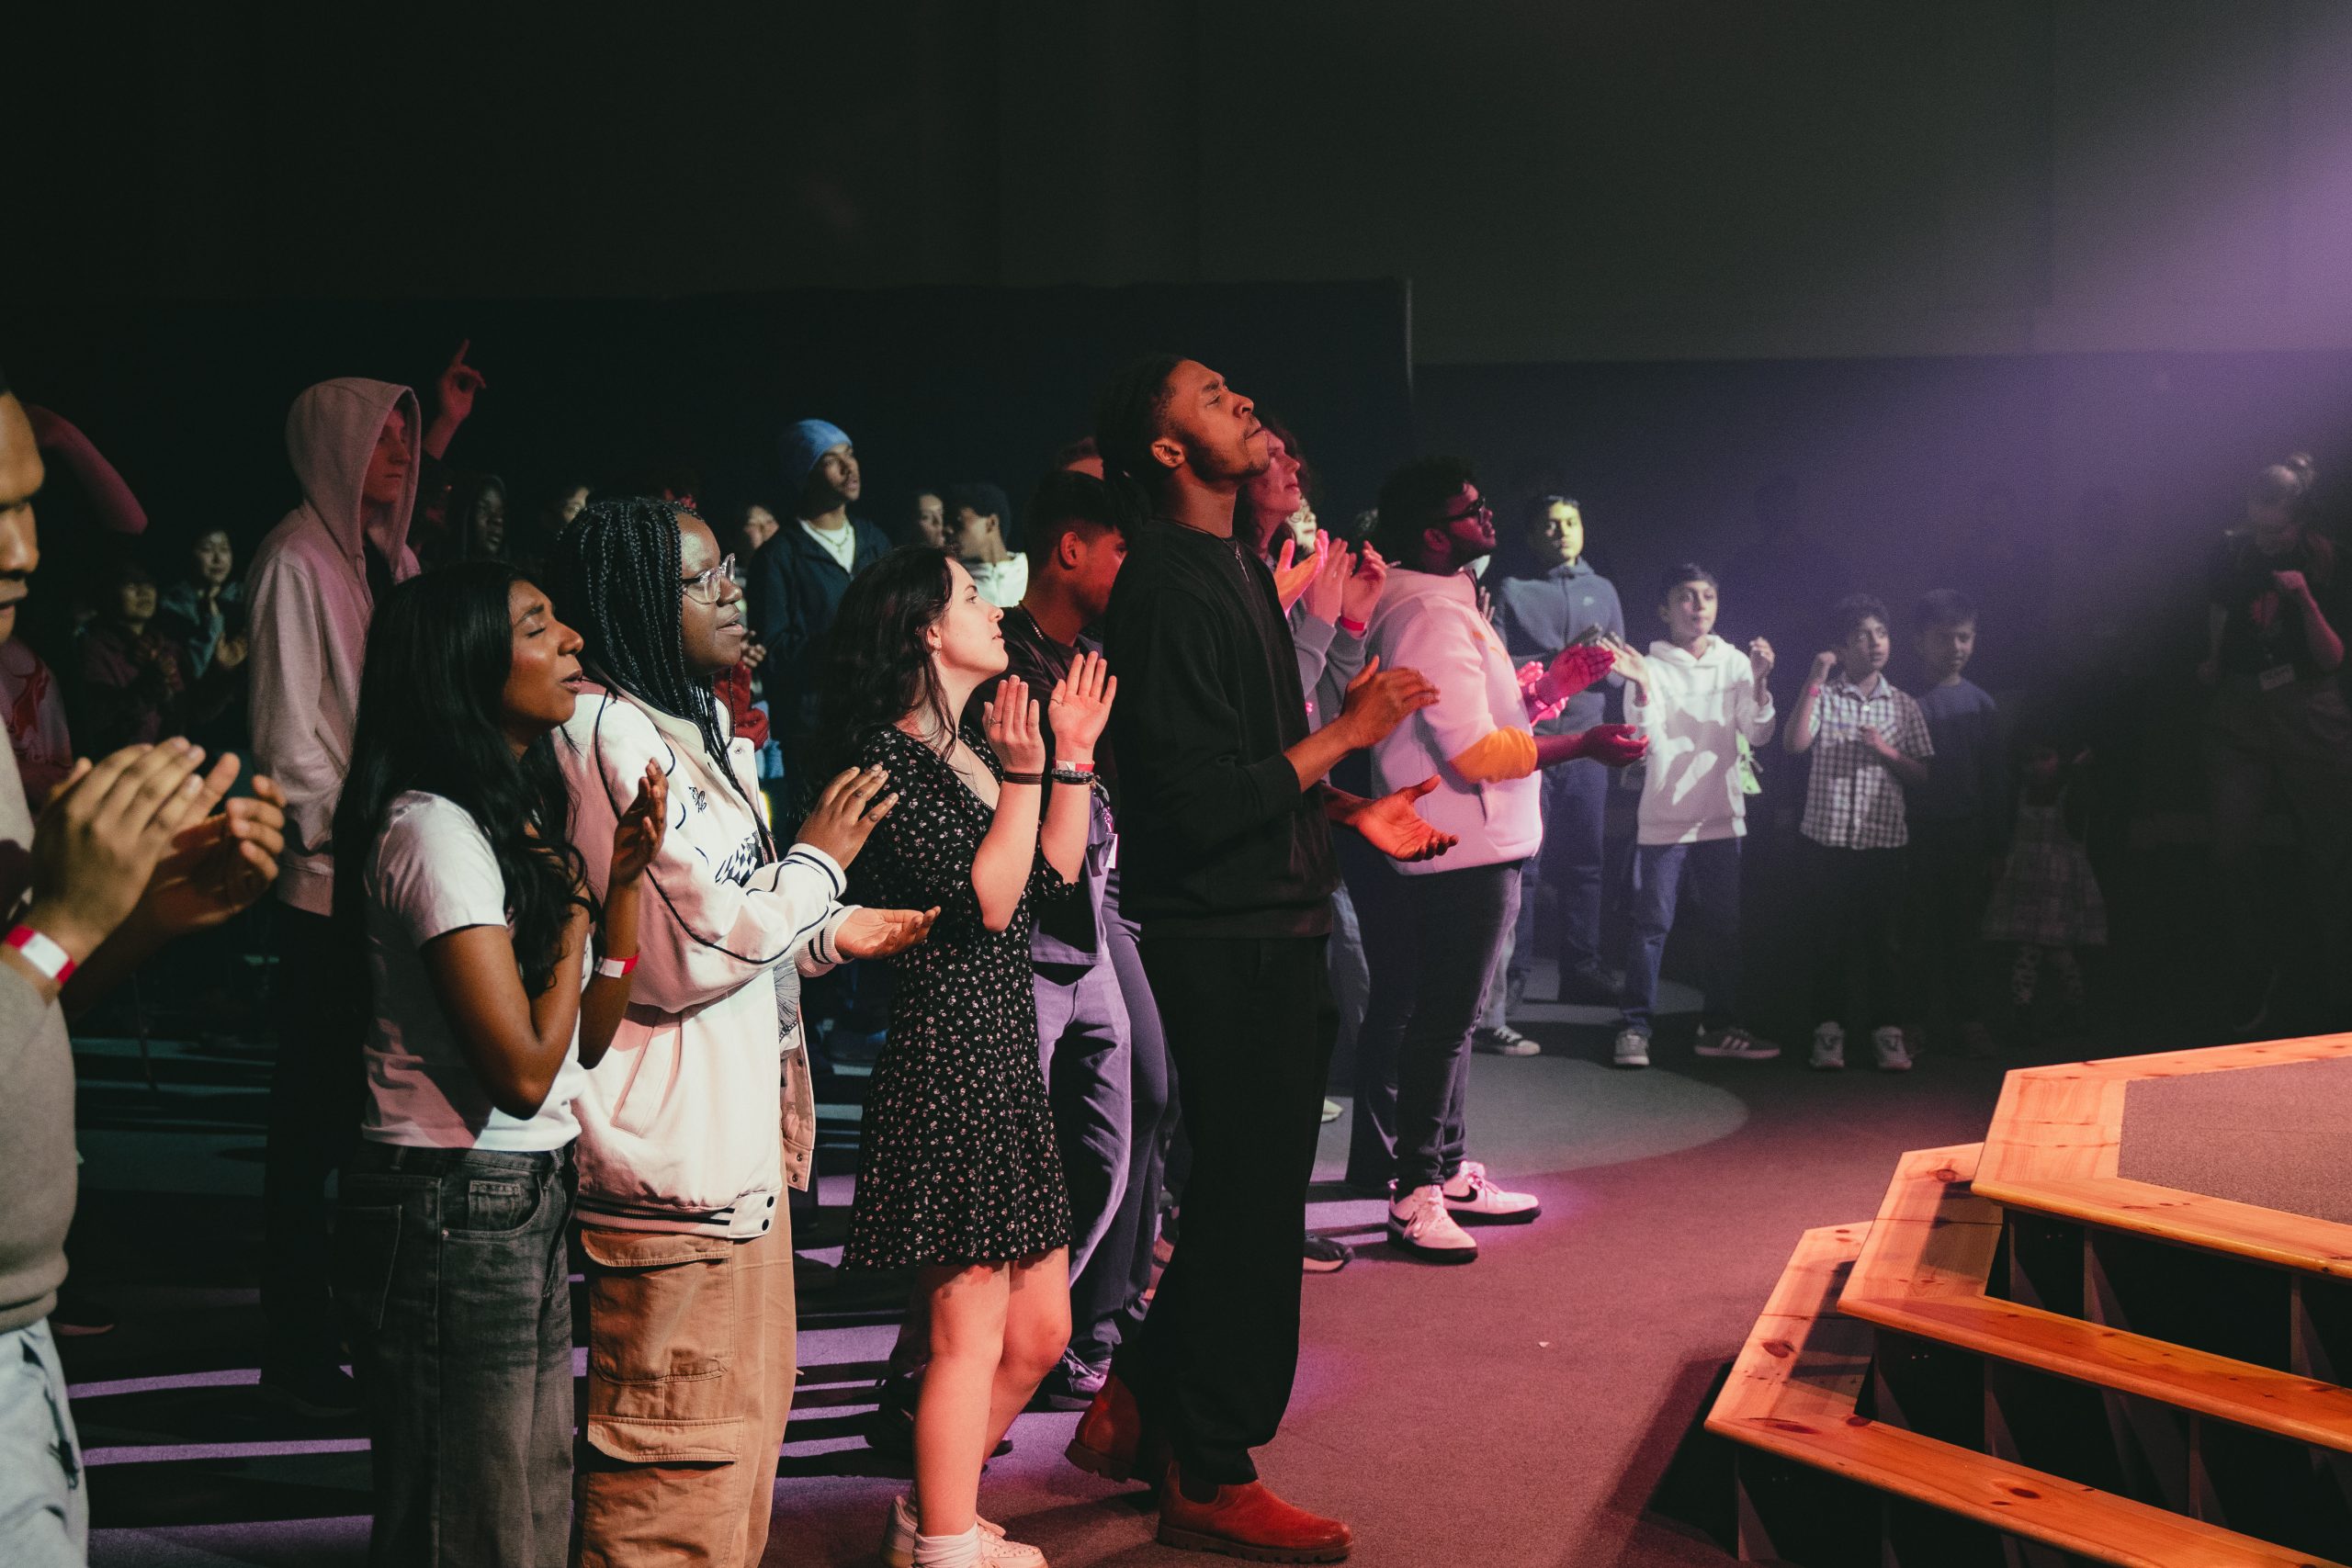 Young people worshipping